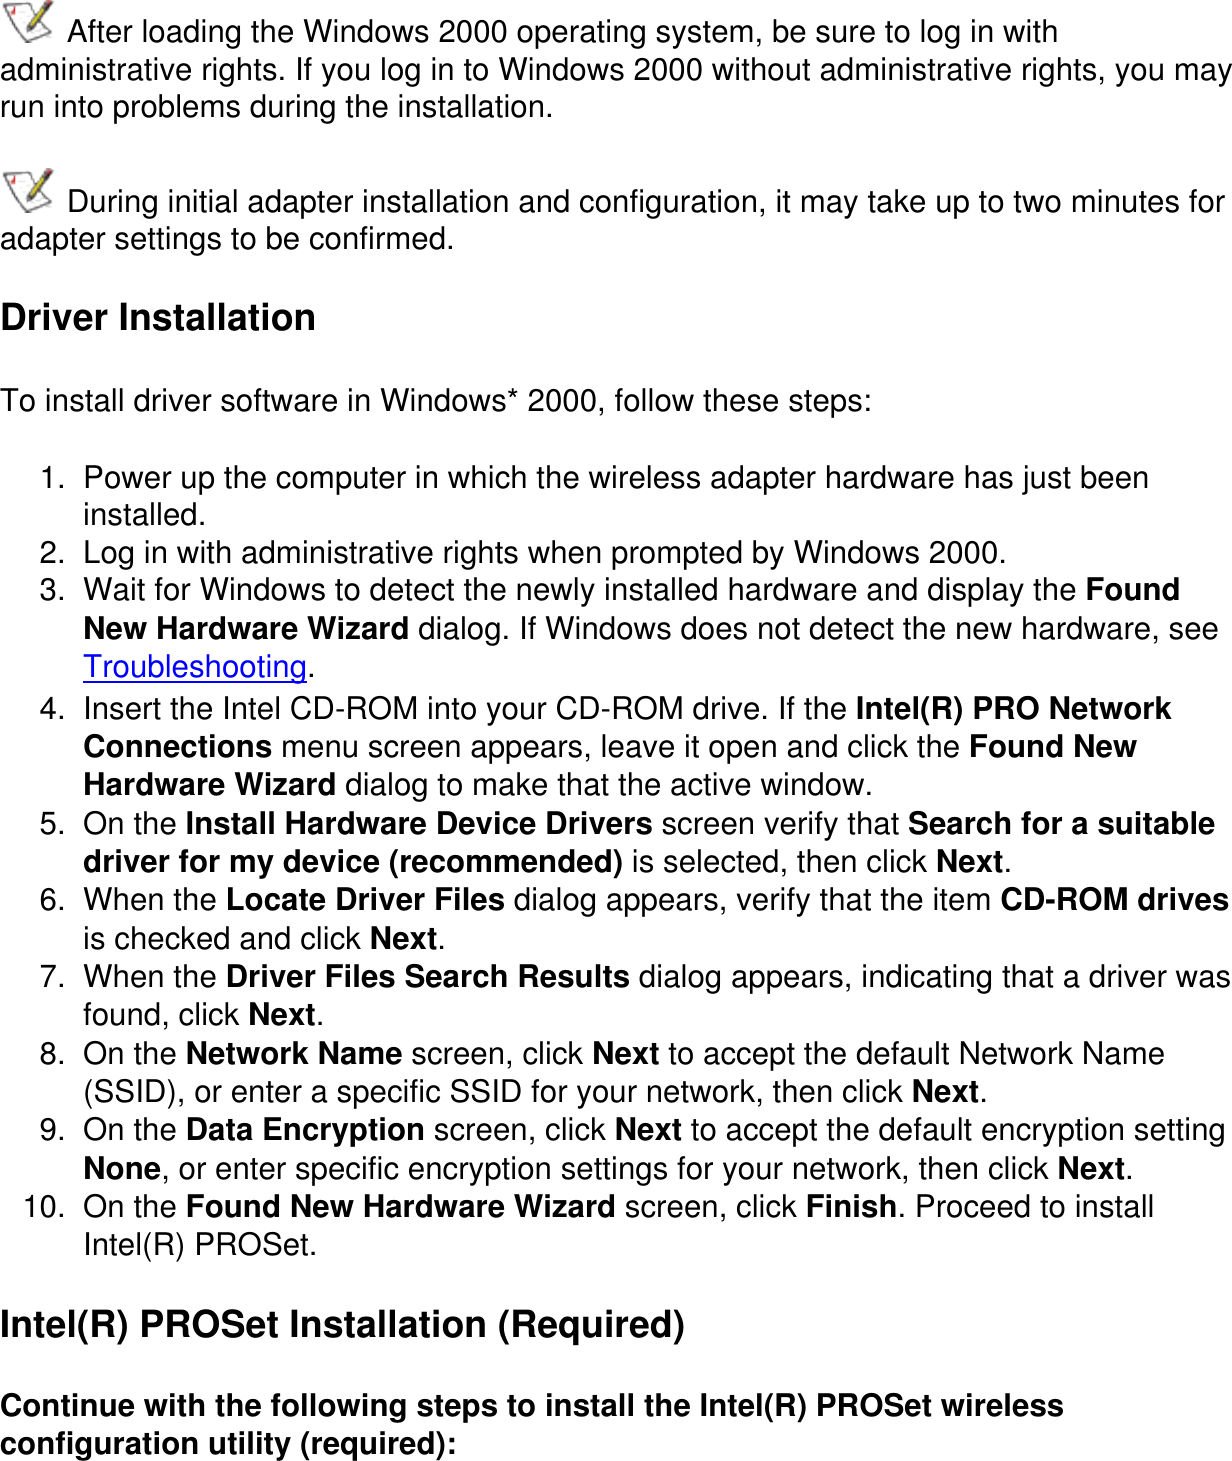  After loading the Windows 2000 operating system, be sure to log in with administrative rights. If you log in to Windows 2000 without administrative rights, you may run into problems during the installation. During initial adapter installation and configuration, it may take up to two minutes for adapter settings to be confirmed.Driver InstallationTo install driver software in Windows* 2000, follow these steps:1.  Power up the computer in which the wireless adapter hardware has just been installed.2.  Log in with administrative rights when prompted by Windows 2000.3.  Wait for Windows to detect the newly installed hardware and display the Found New Hardware Wizard dialog. If Windows does not detect the new hardware, see Troubleshooting.4.  Insert the Intel CD-ROM into your CD-ROM drive. If the Intel(R) PRO Network Connections menu screen appears, leave it open and click the Found New Hardware Wizard dialog to make that the active window.5.  On the Install Hardware Device Drivers screen verify that Search for a suitable driver for my device (recommended) is selected, then click Next.6.  When the Locate Driver Files dialog appears, verify that the item CD-ROM drives is checked and click Next.7.  When the Driver Files Search Results dialog appears, indicating that a driver was found, click Next.8.  On the Network Name screen, click Next to accept the default Network Name (SSID), or enter a specific SSID for your network, then click Next.9.  On the Data Encryption screen, click Next to accept the default encryption setting None, or enter specific encryption settings for your network, then click Next.10.  On the Found New Hardware Wizard screen, click Finish. Proceed to install Intel(R) PROSet.Intel(R) PROSet Installation (Required)Continue with the following steps to install the Intel(R) PROSet wireless configuration utility (required):